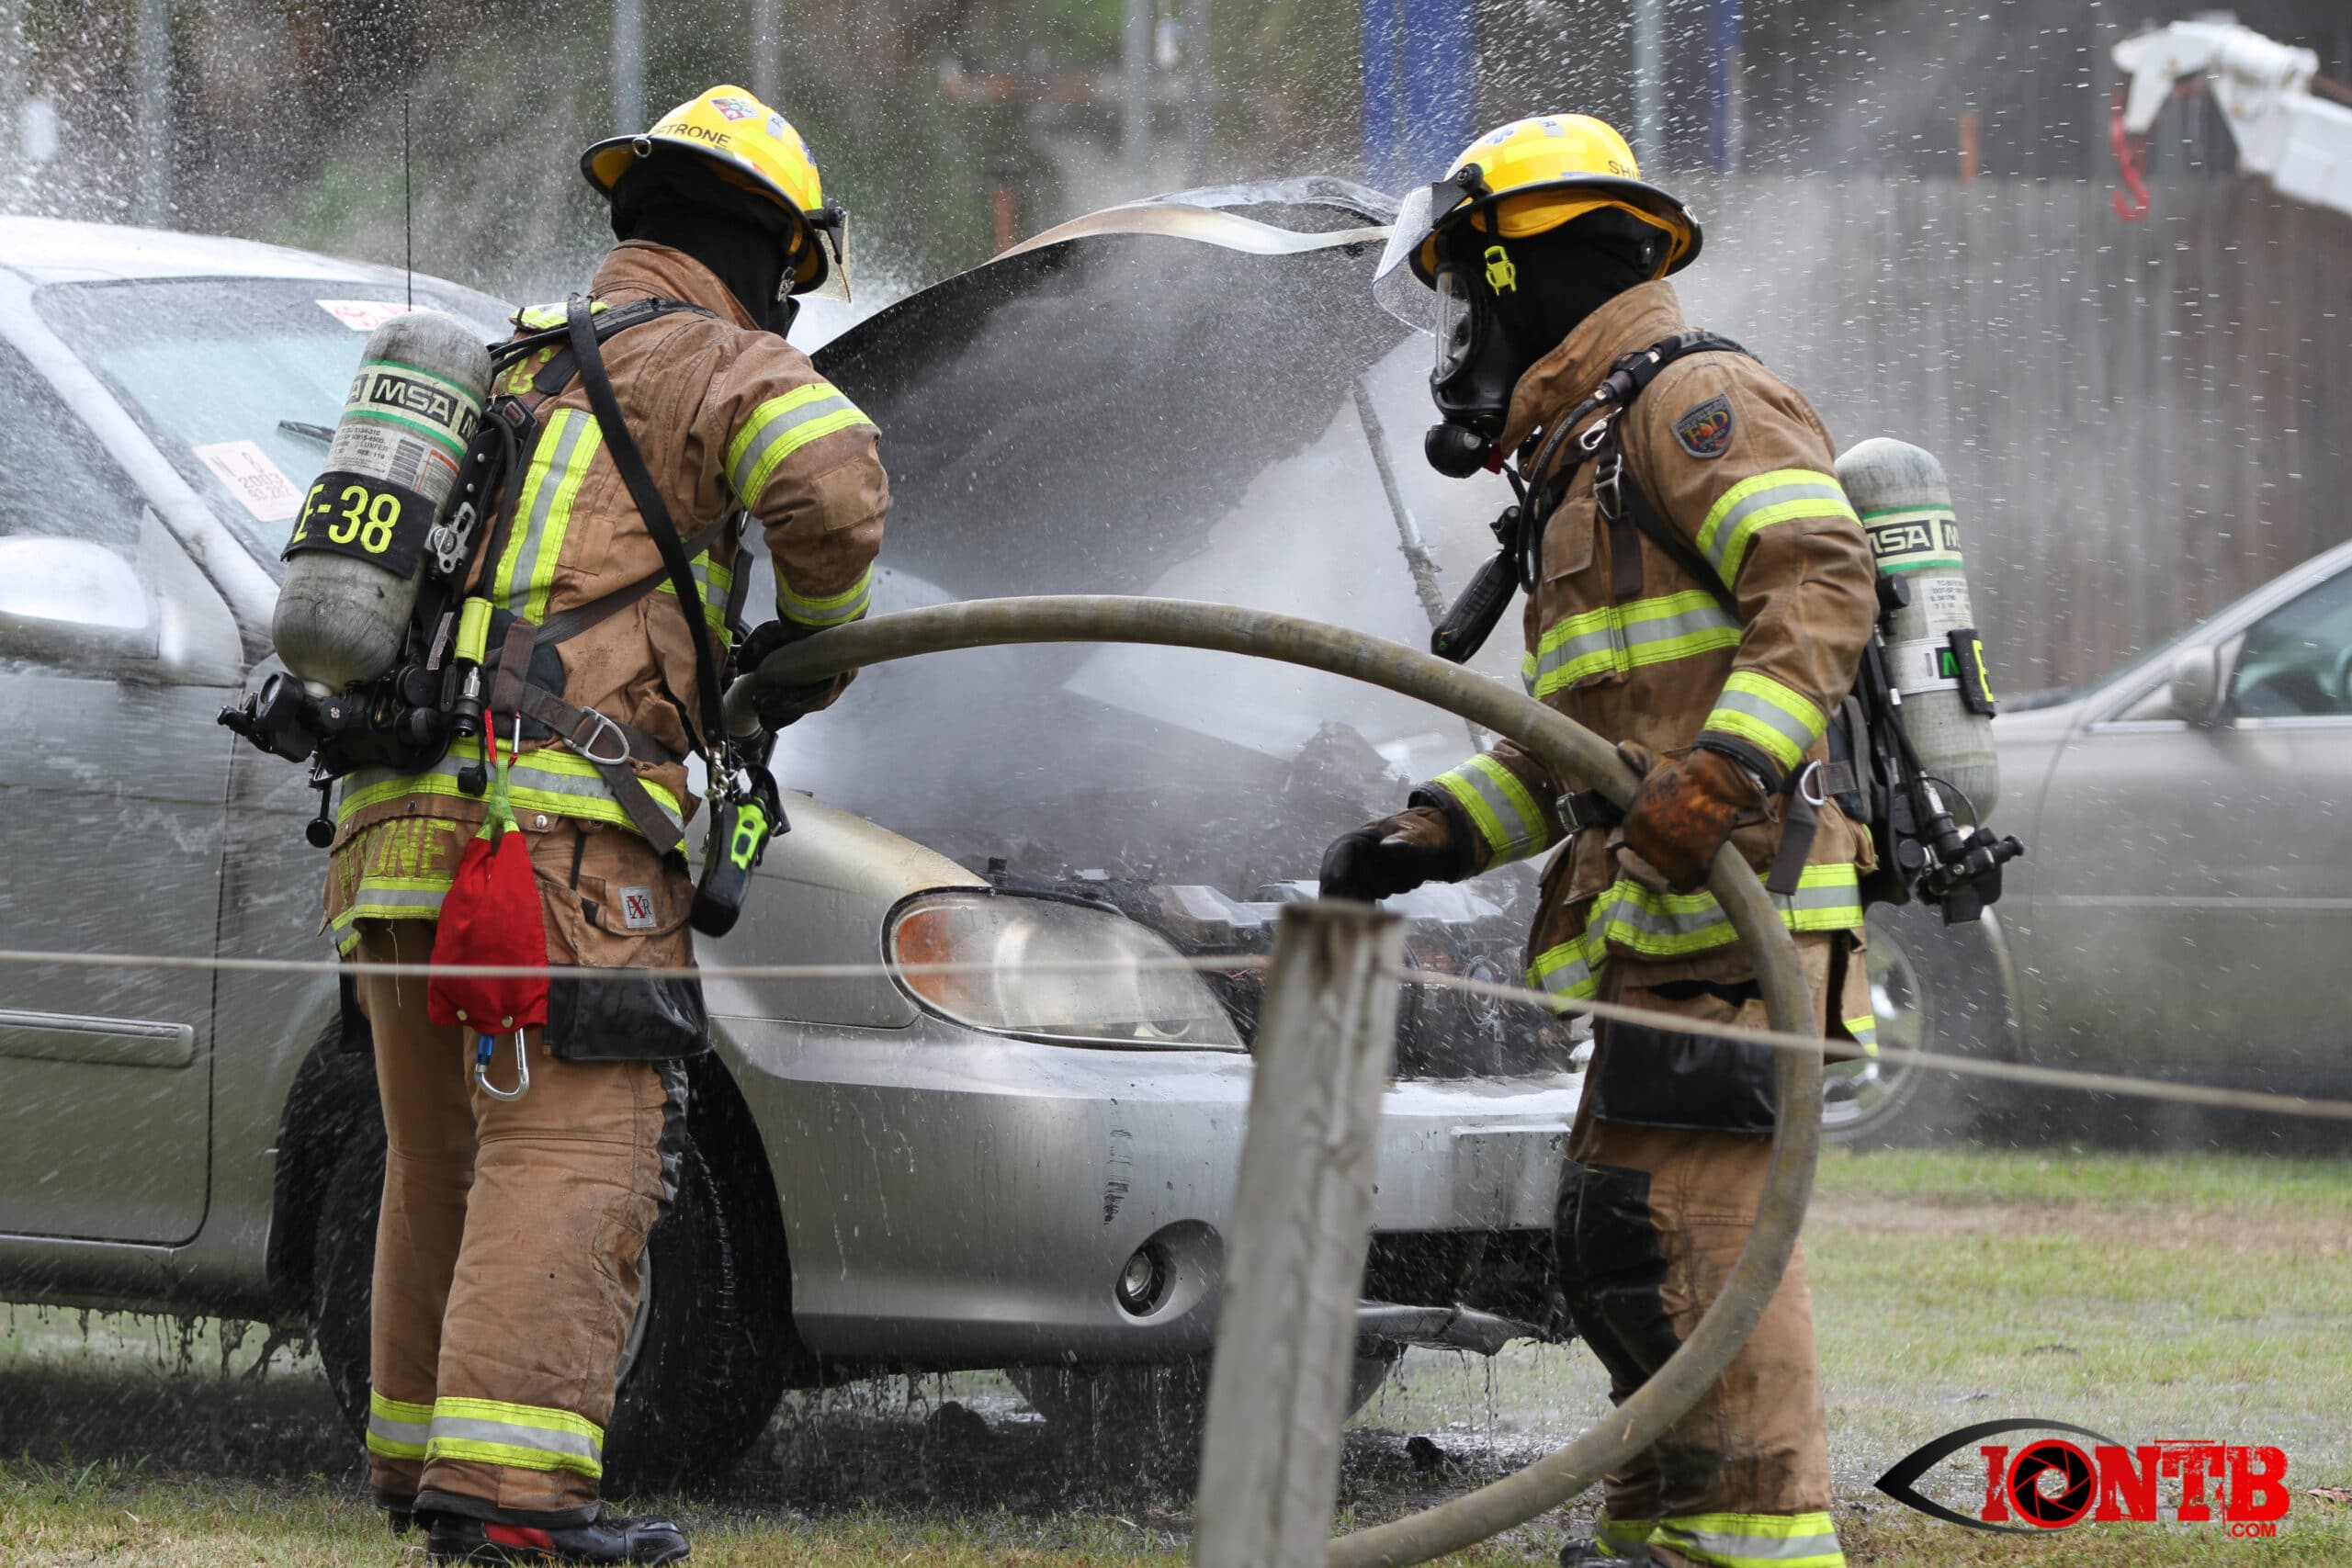 Vehicle Fire at Guaranteed Auto Sales in Largo